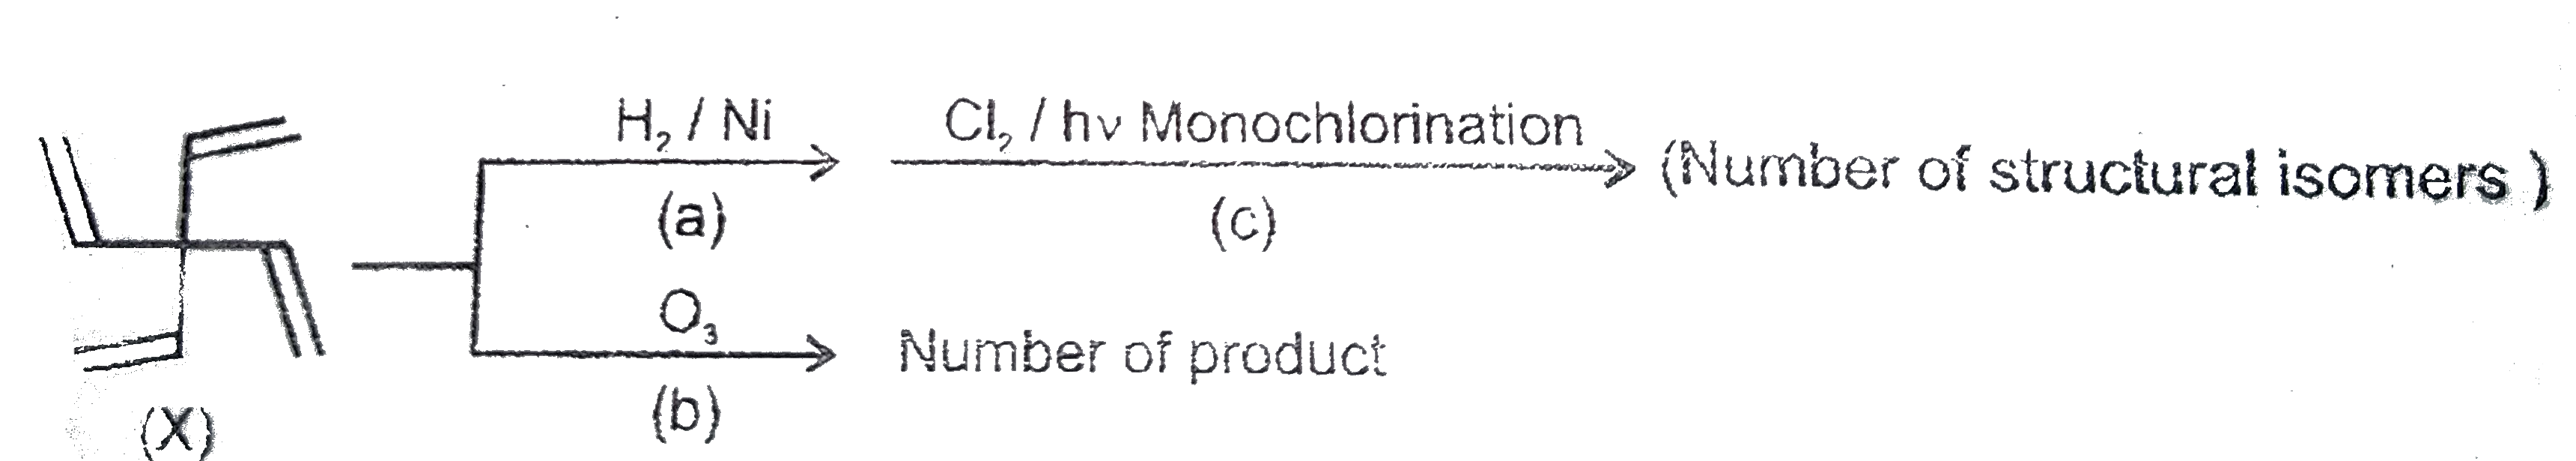 Calculate sum of number of products formed in the reaction a,b and c .